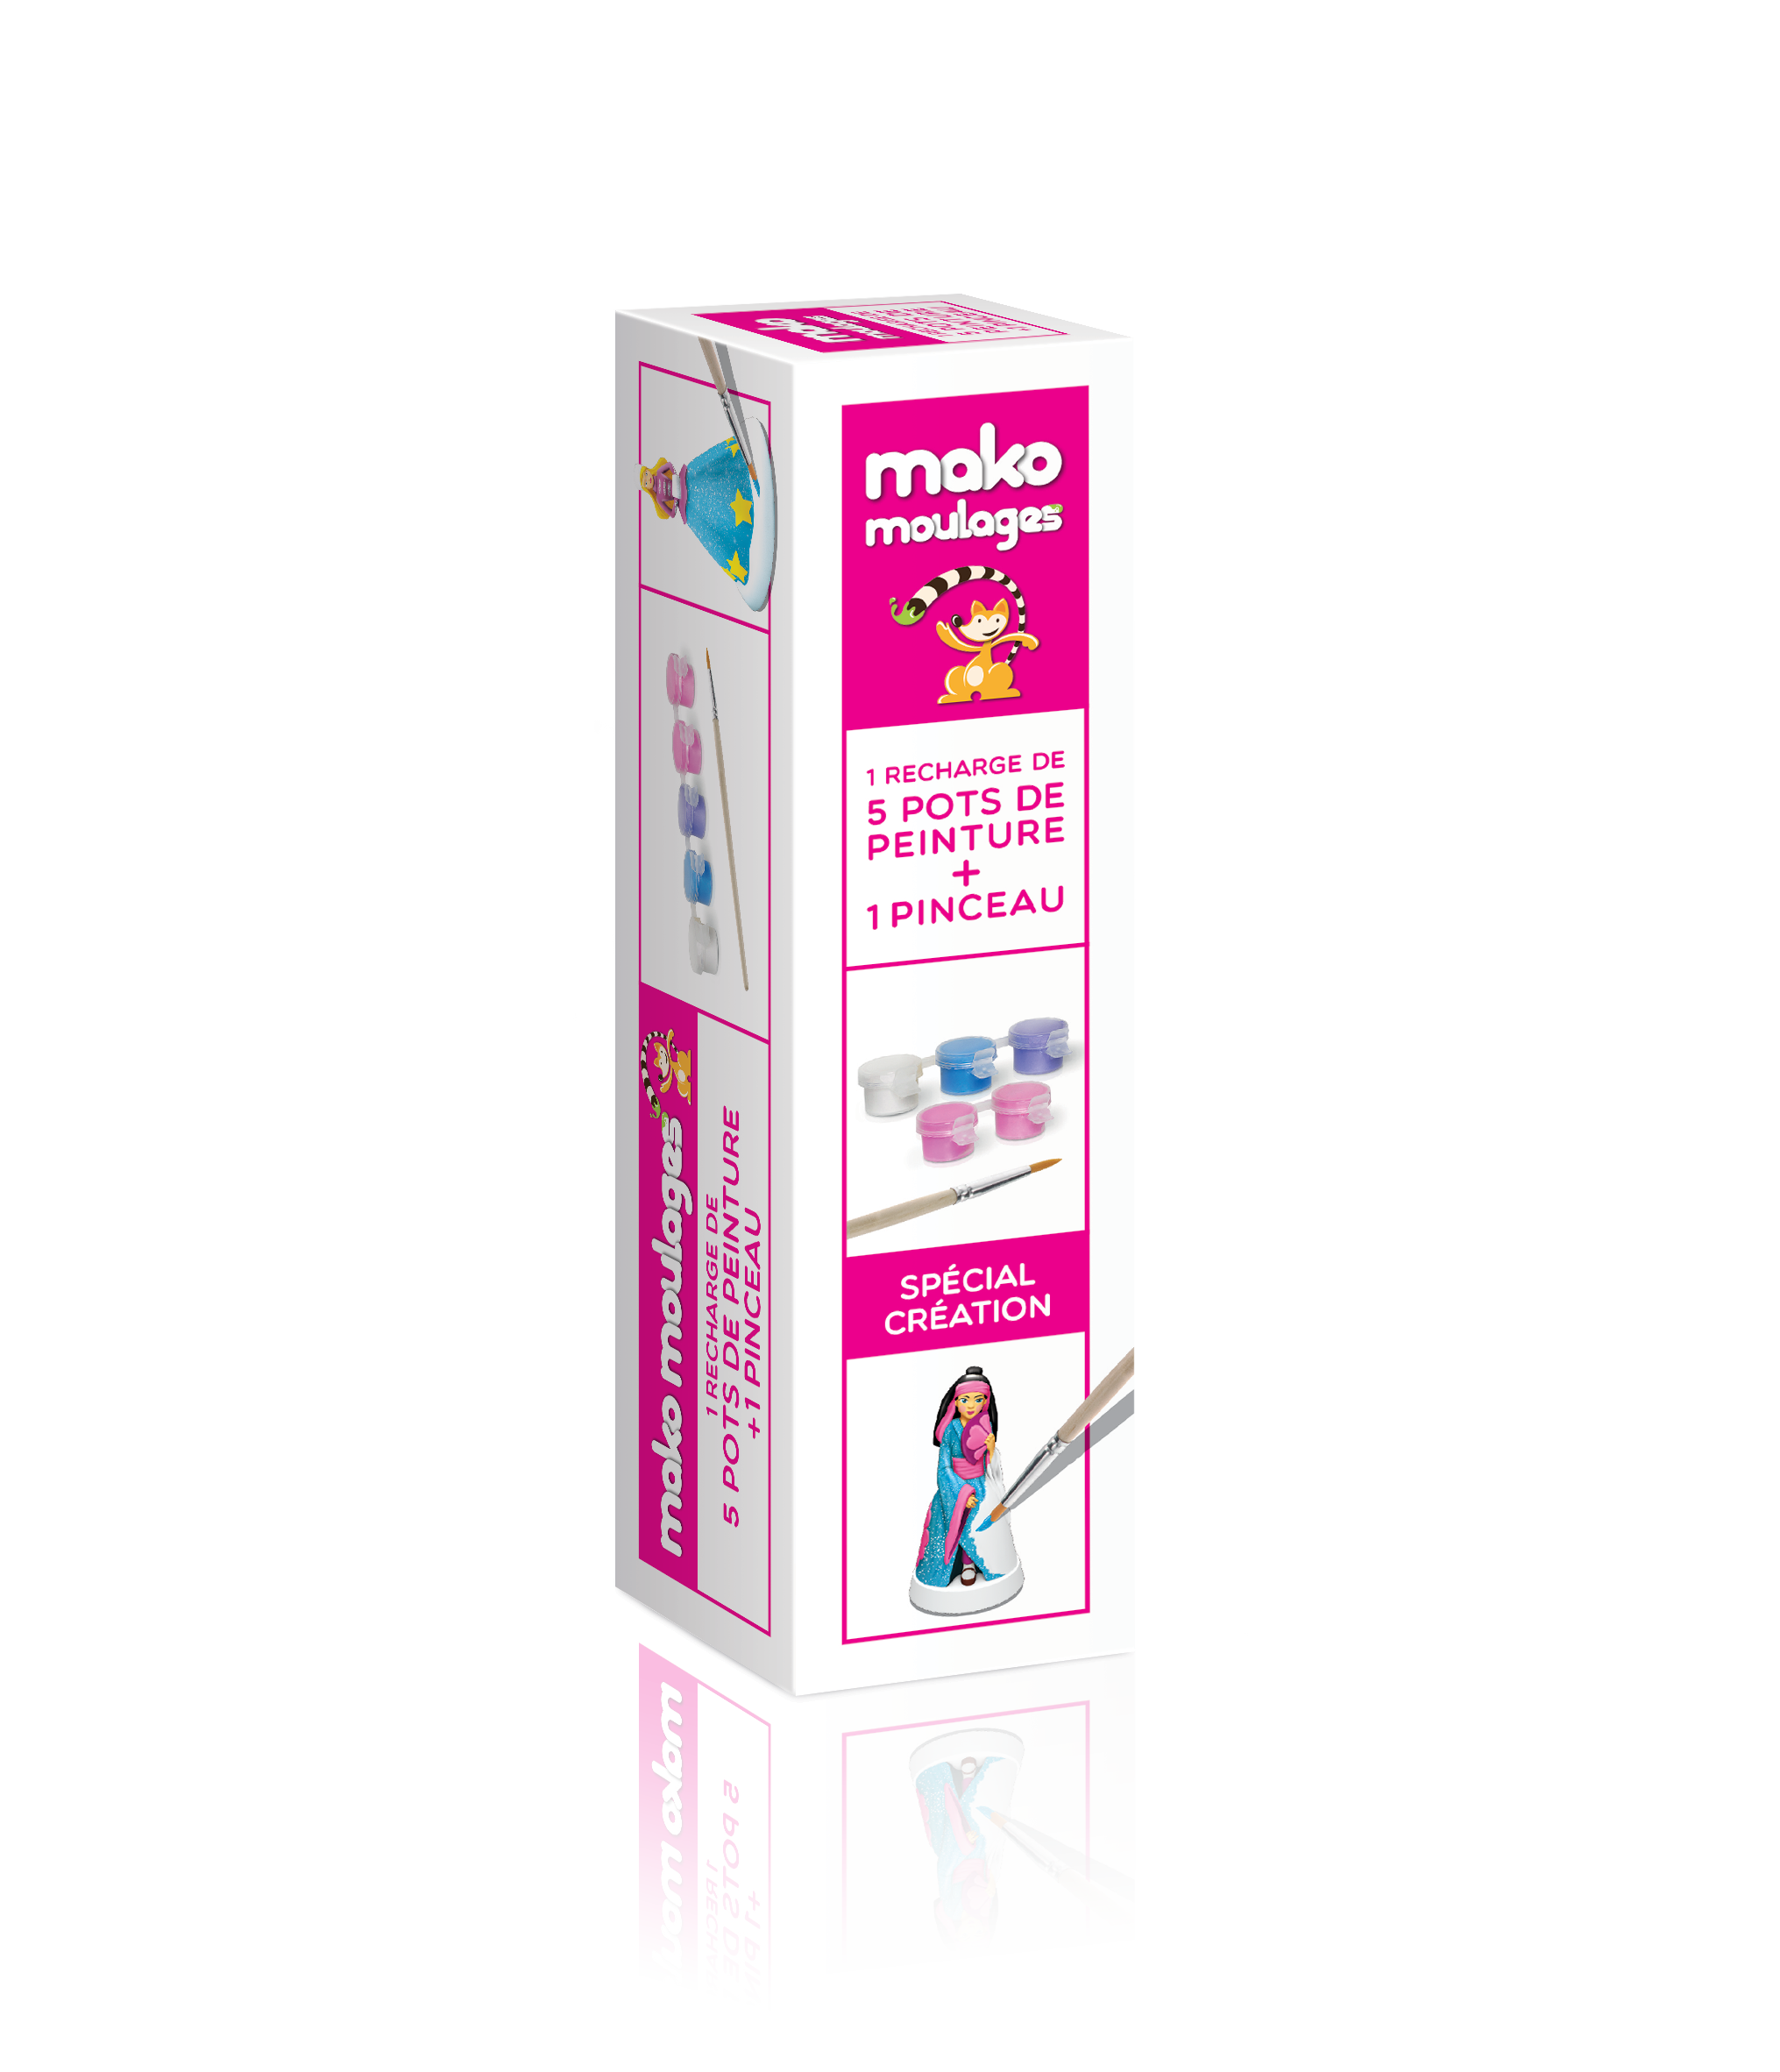 Mako Créations “GIRLY” paint refill